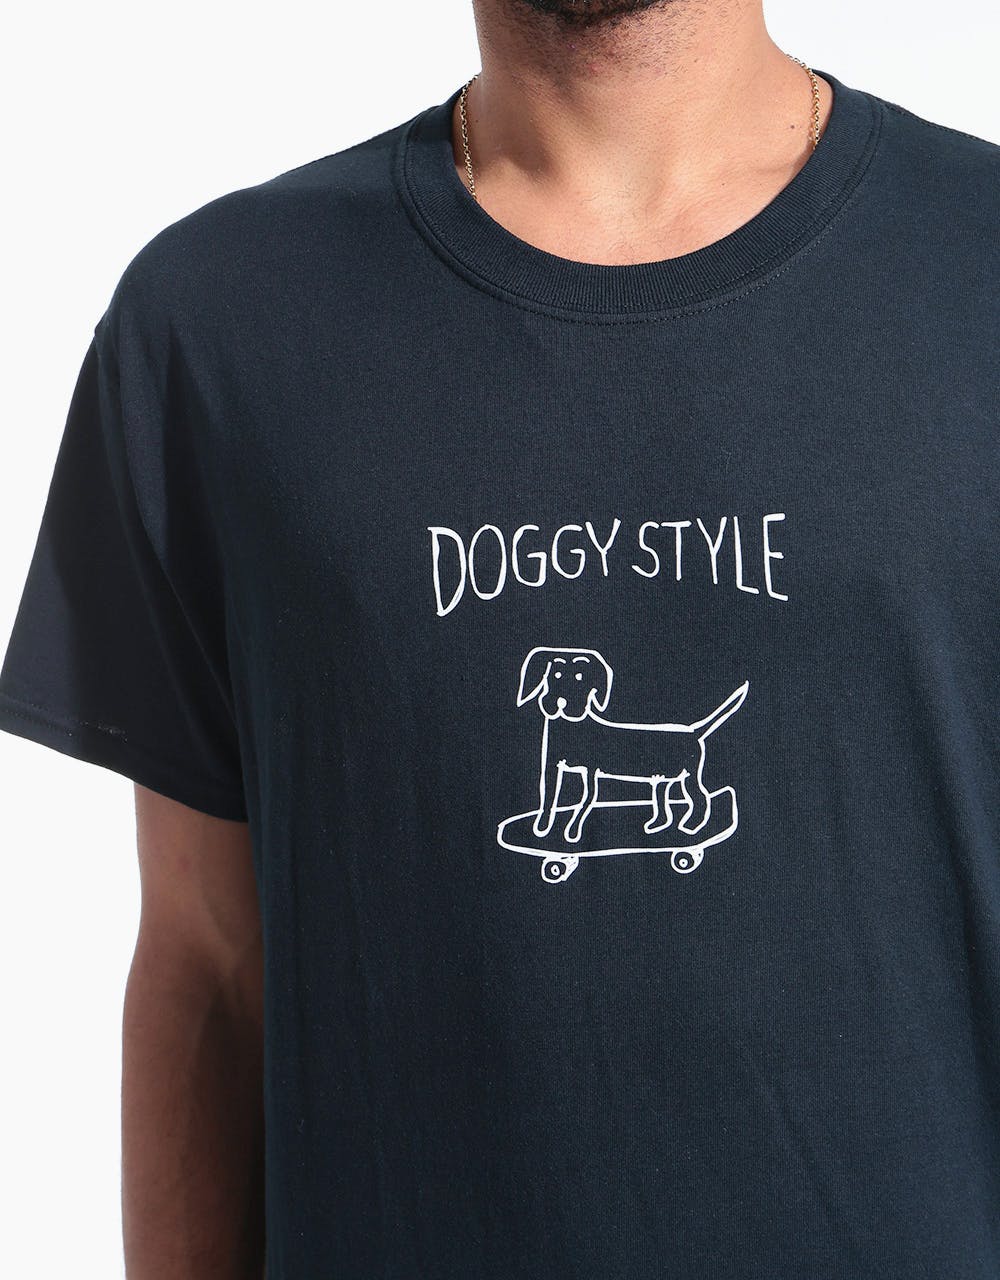 Route One Doggy Style T-Shirt - Black